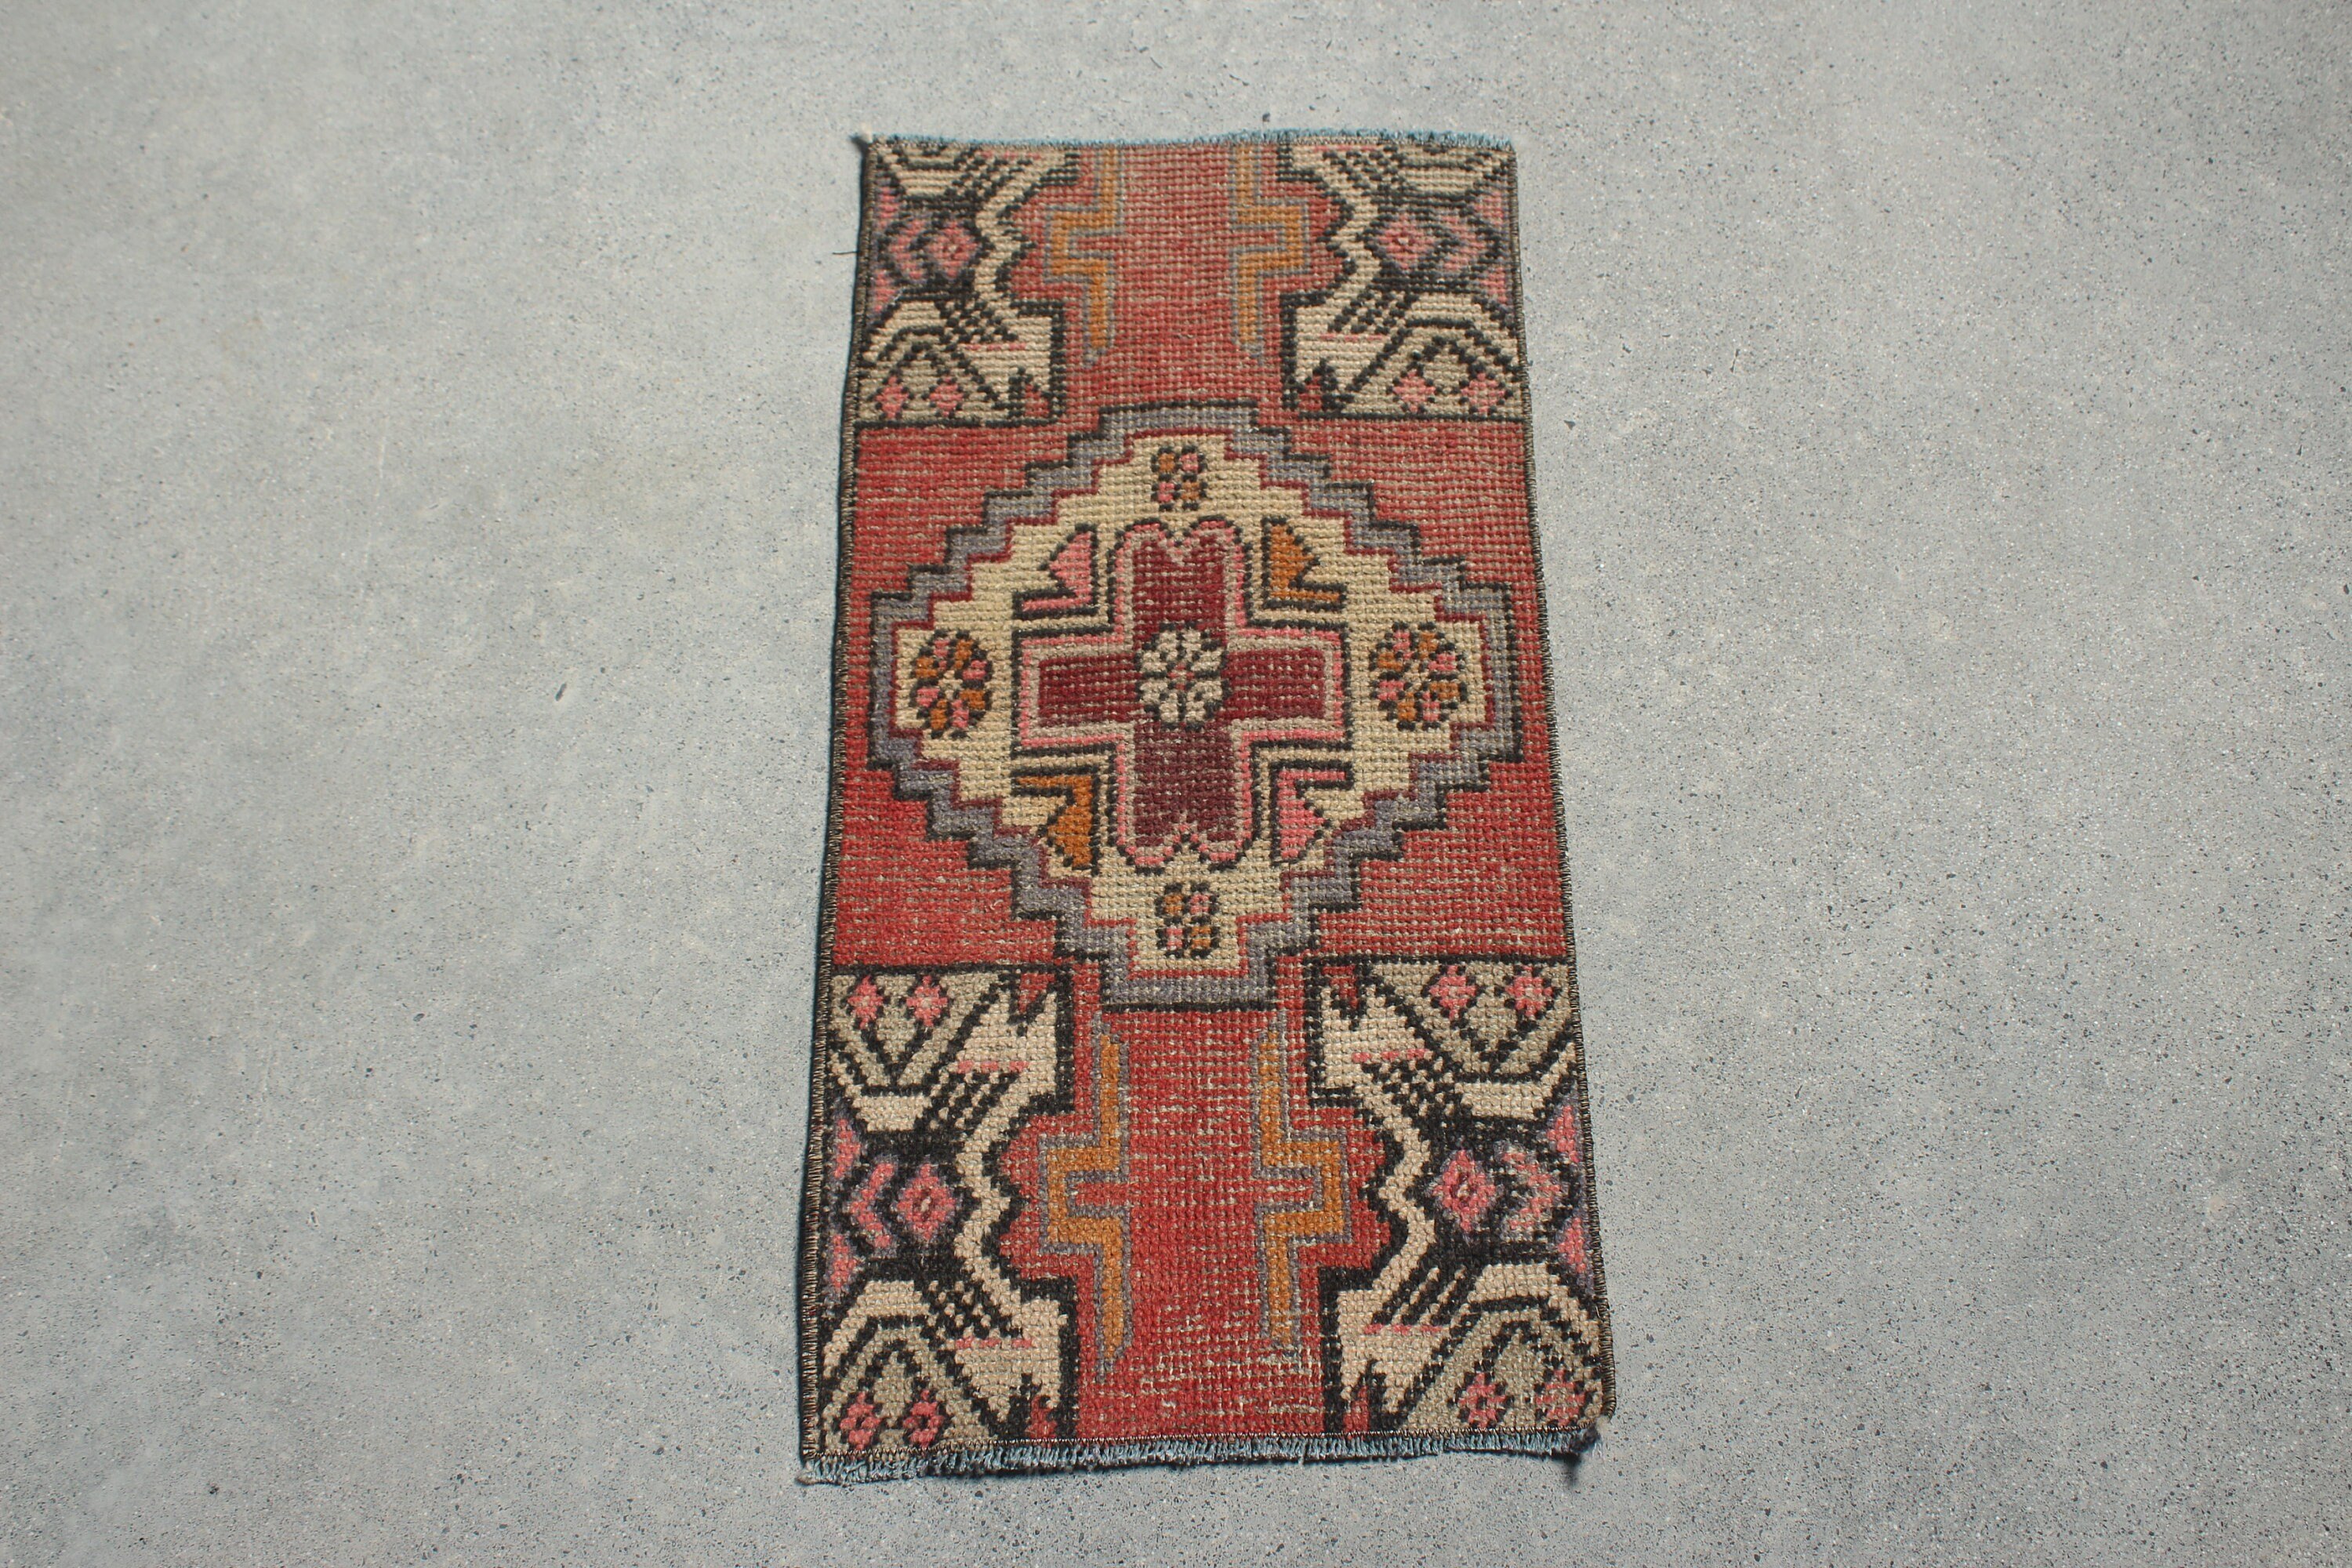 Small Woven Rug Rugs, Anatolian Rug, 1.3x2.6 ft Small Rugs, Red Oushak Rug, Antique Rugs, Vintage Rugs, Bedroom Rug, Turkish Rug, Bath Rug